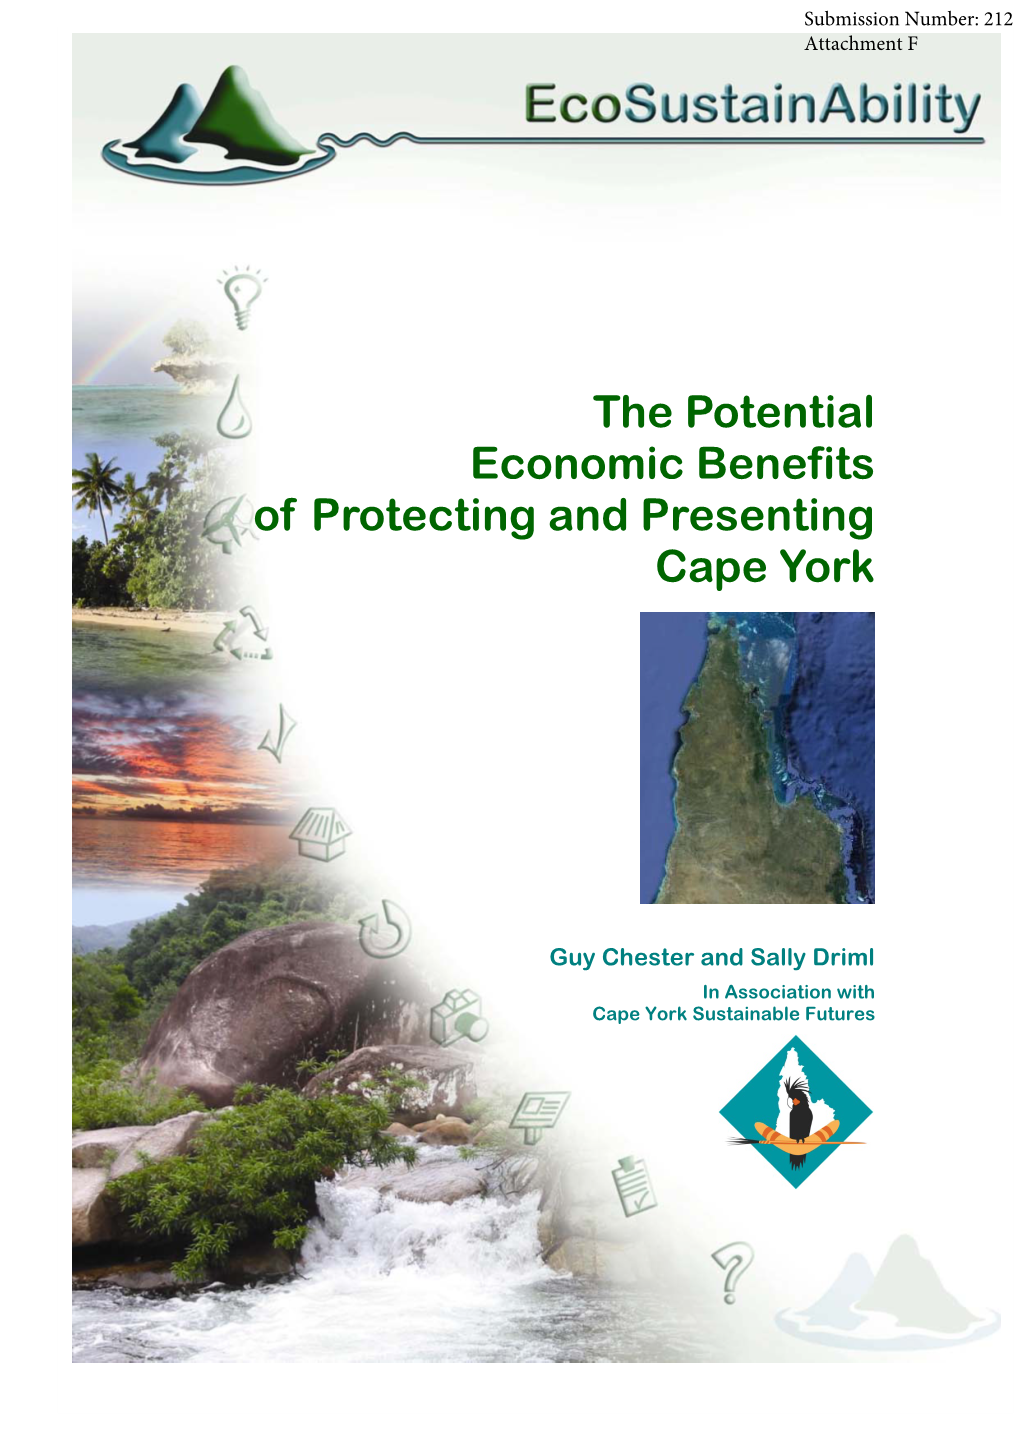 The Potential Economic Benefits of Protecting and Presenting Cape York